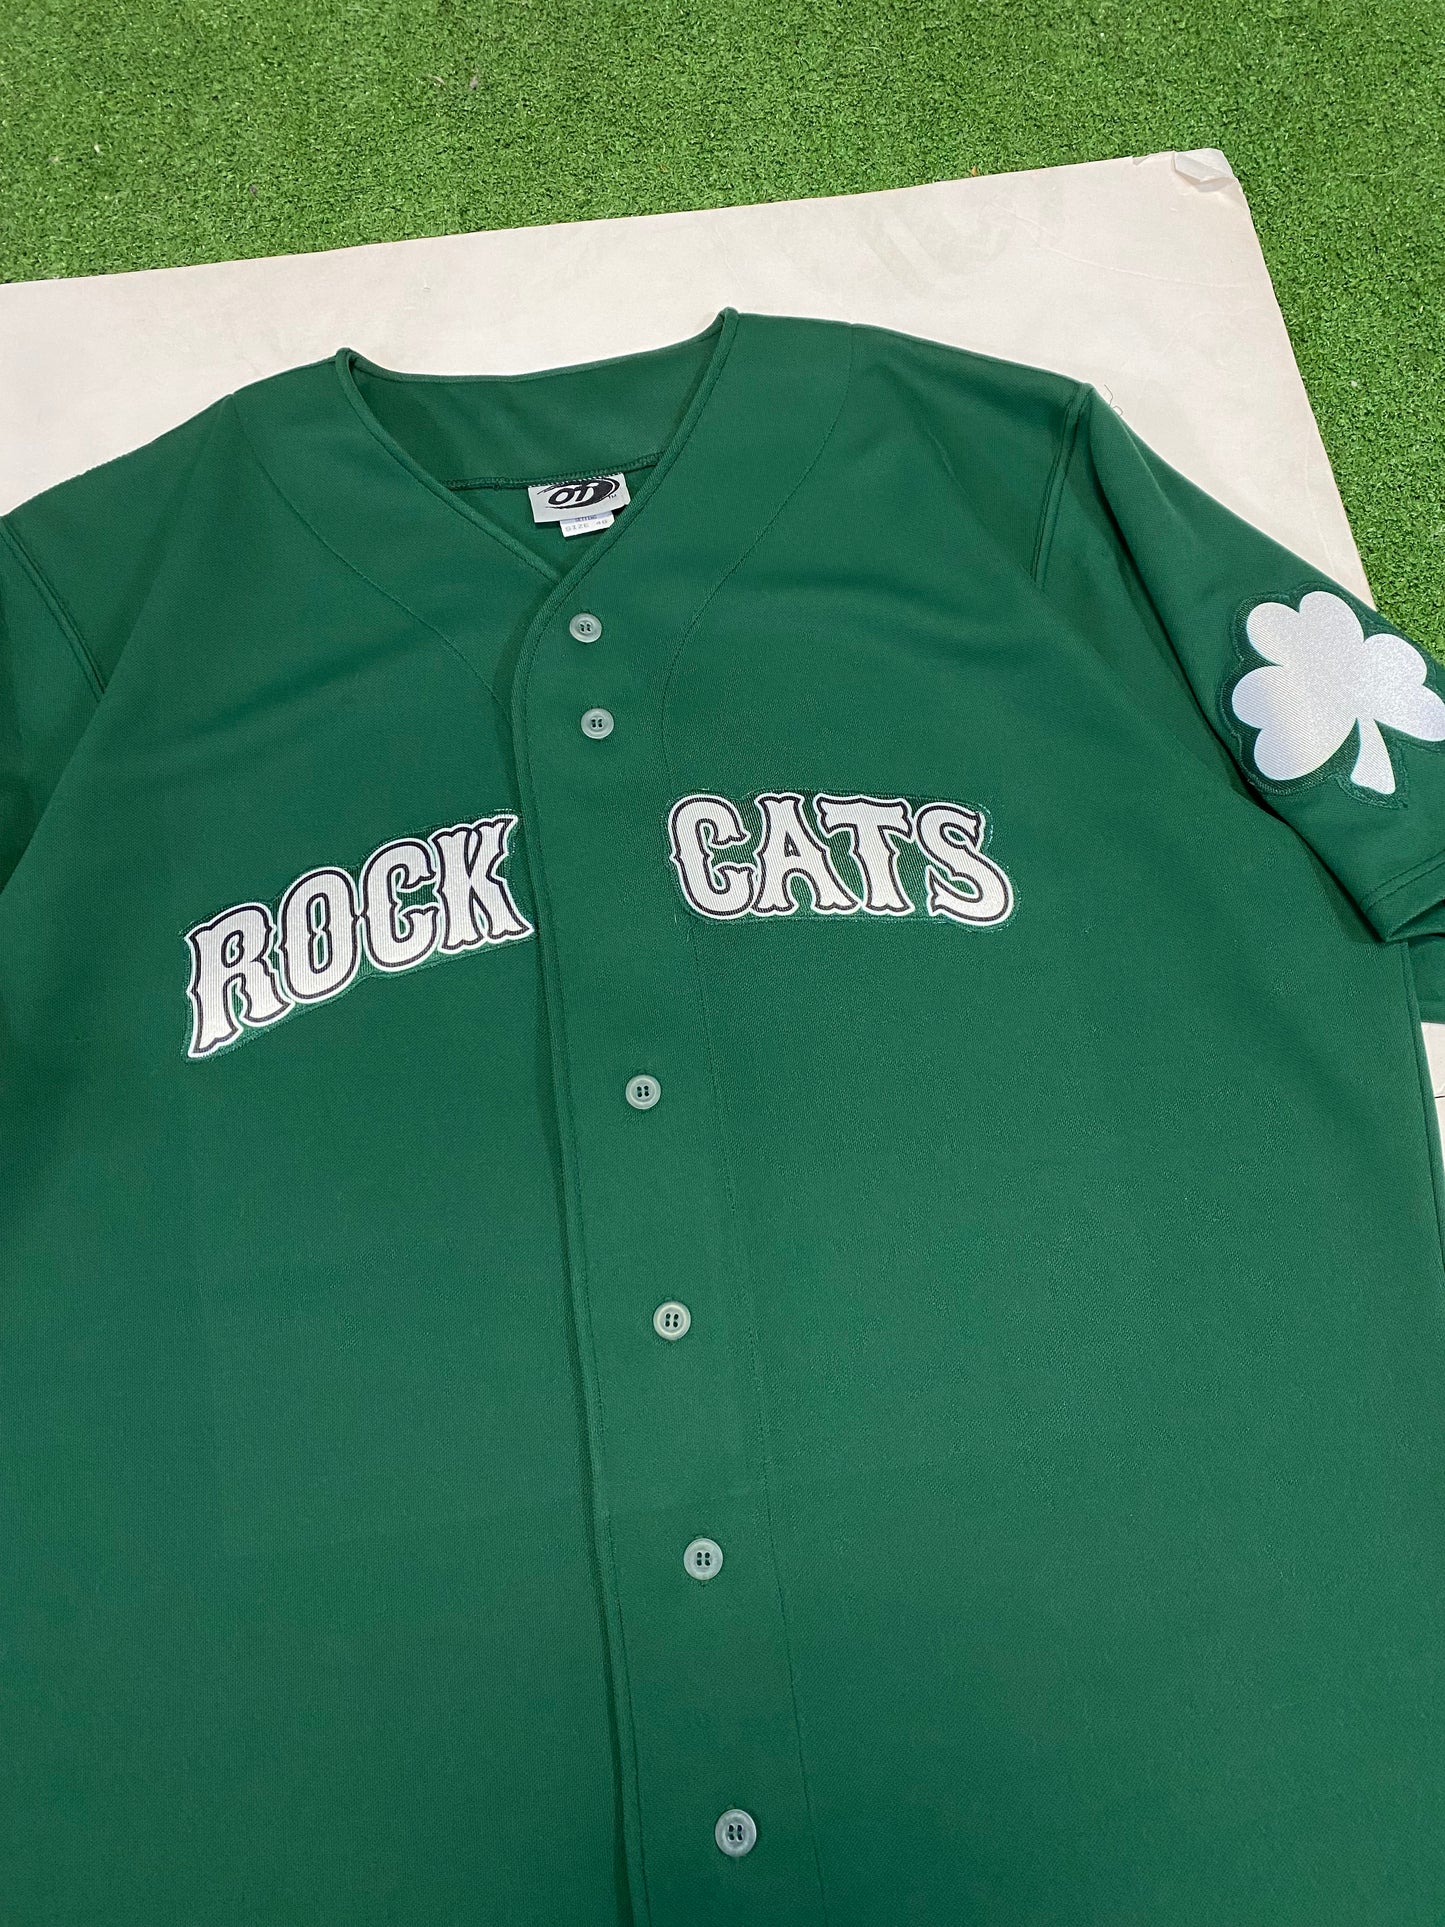 New Britain Rock Cats Authentic MiLB Jersey